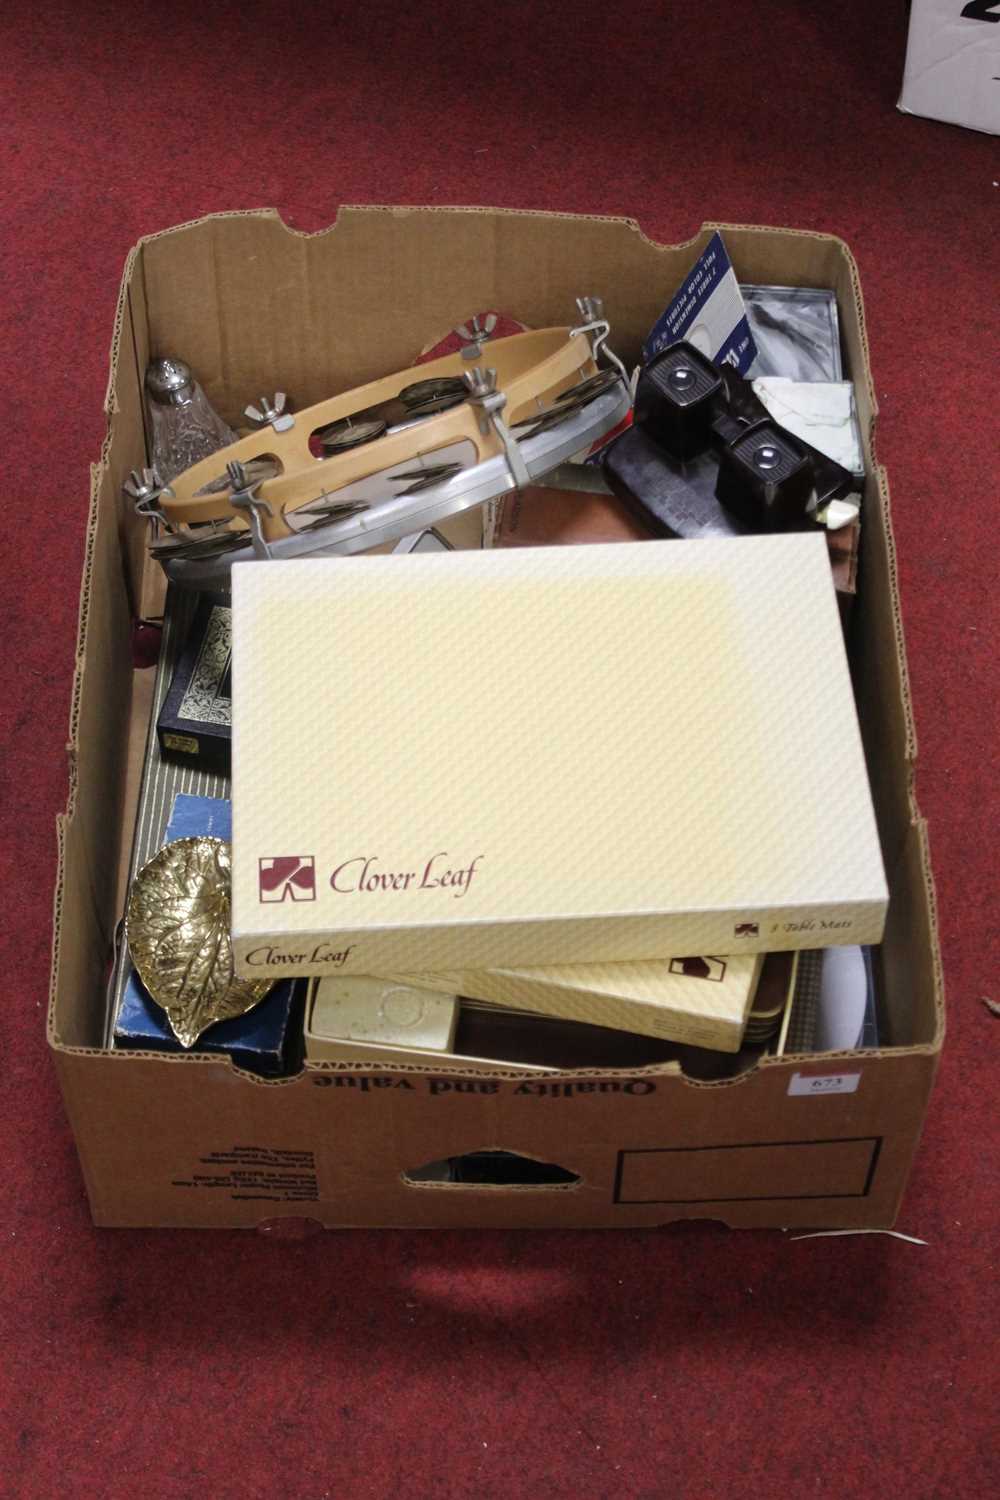 A box of miscellaneous items to include a box of Cloverleaf place mats, a bakelite Viewmaster